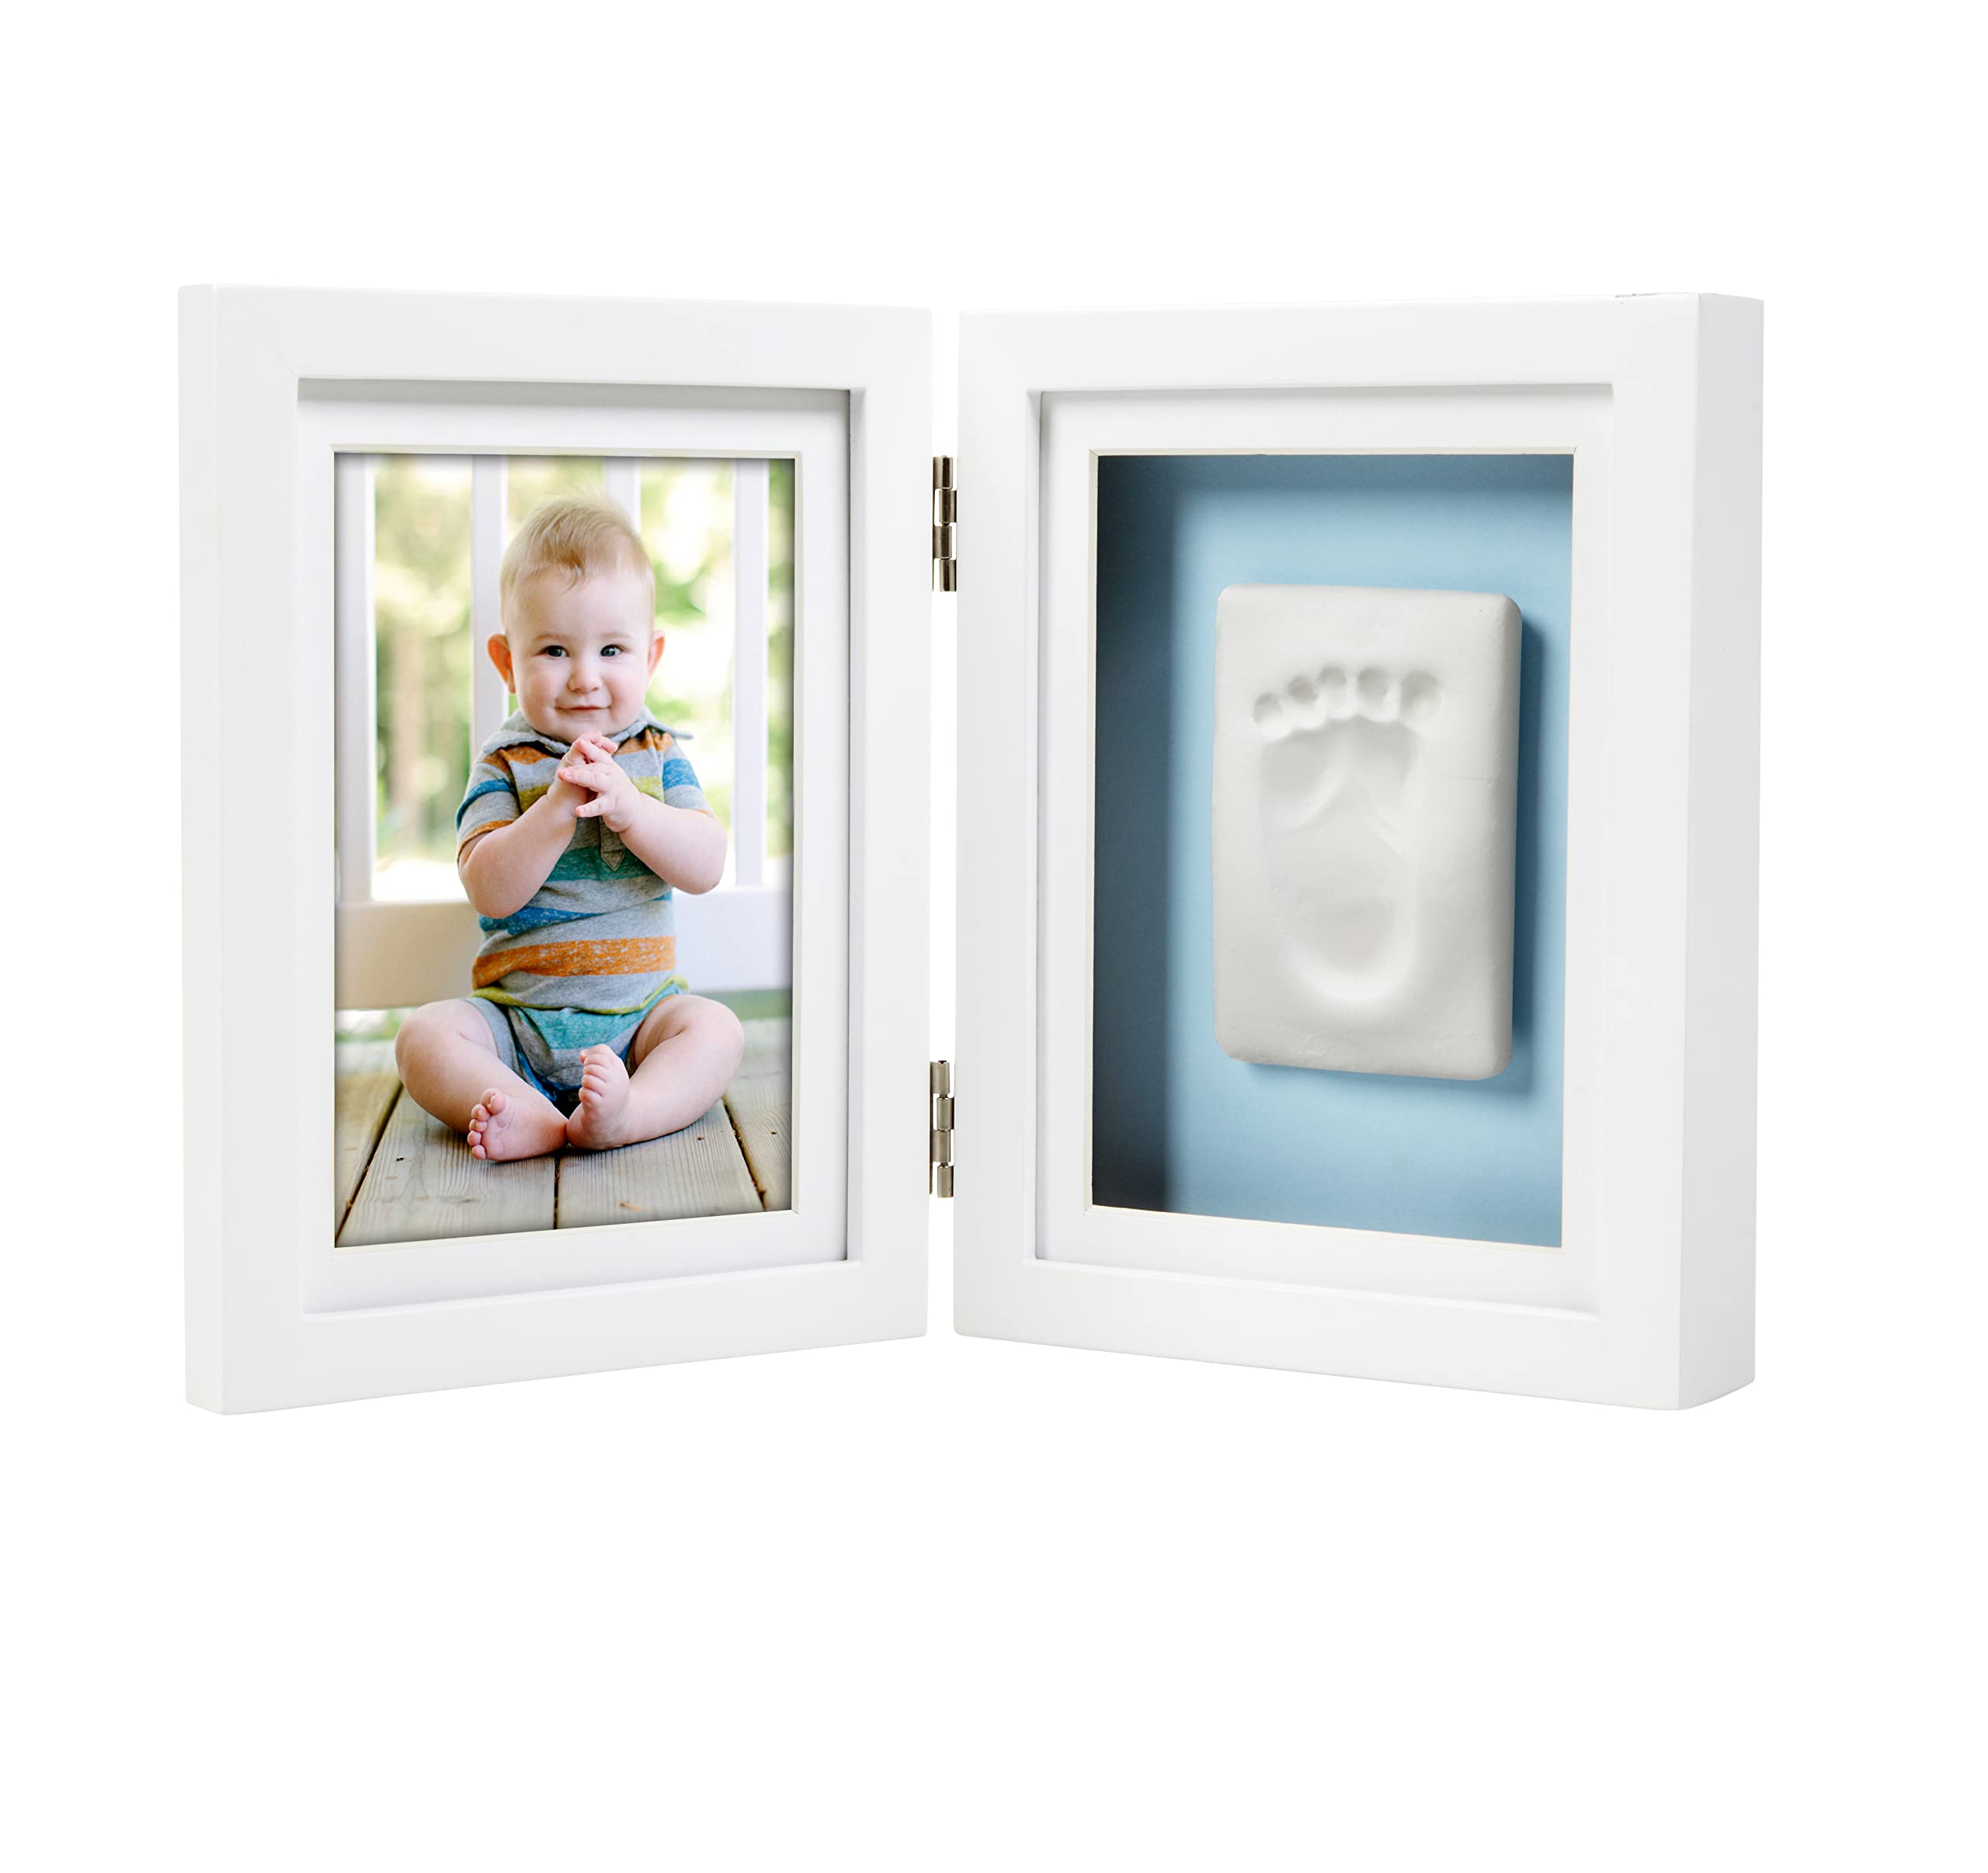 Pearhead Babyprints Newborn Baby Handprint and Footprint Desk Photo Frame & Impression Kit, Excellent Mothers Day, Baptism or Christening Gift, White